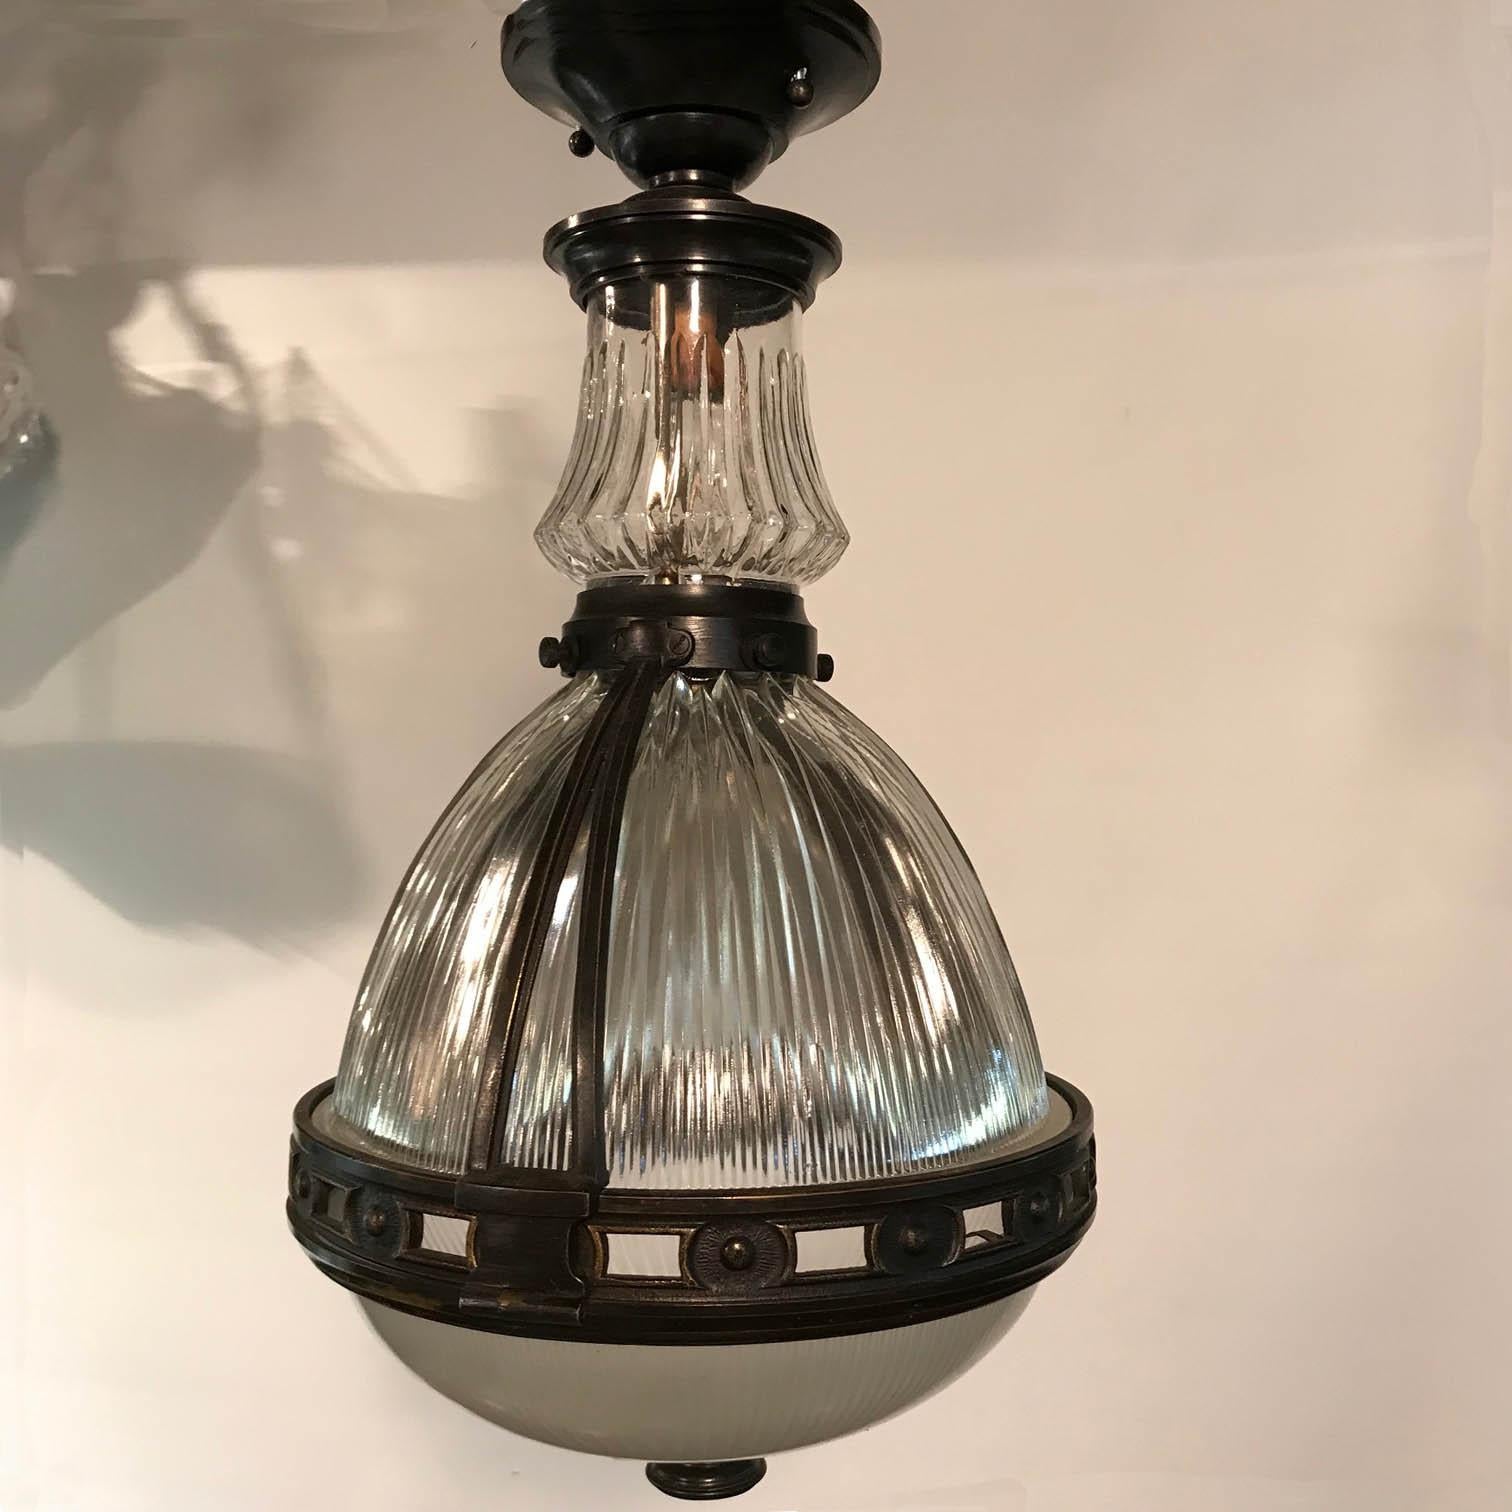 This is a rather rare example of its type both for its form but also for its condition which is good and entirely original. From the canopy to the finial Its all there, undamaged, and ready to hang. This fixture would enhance many 20th century